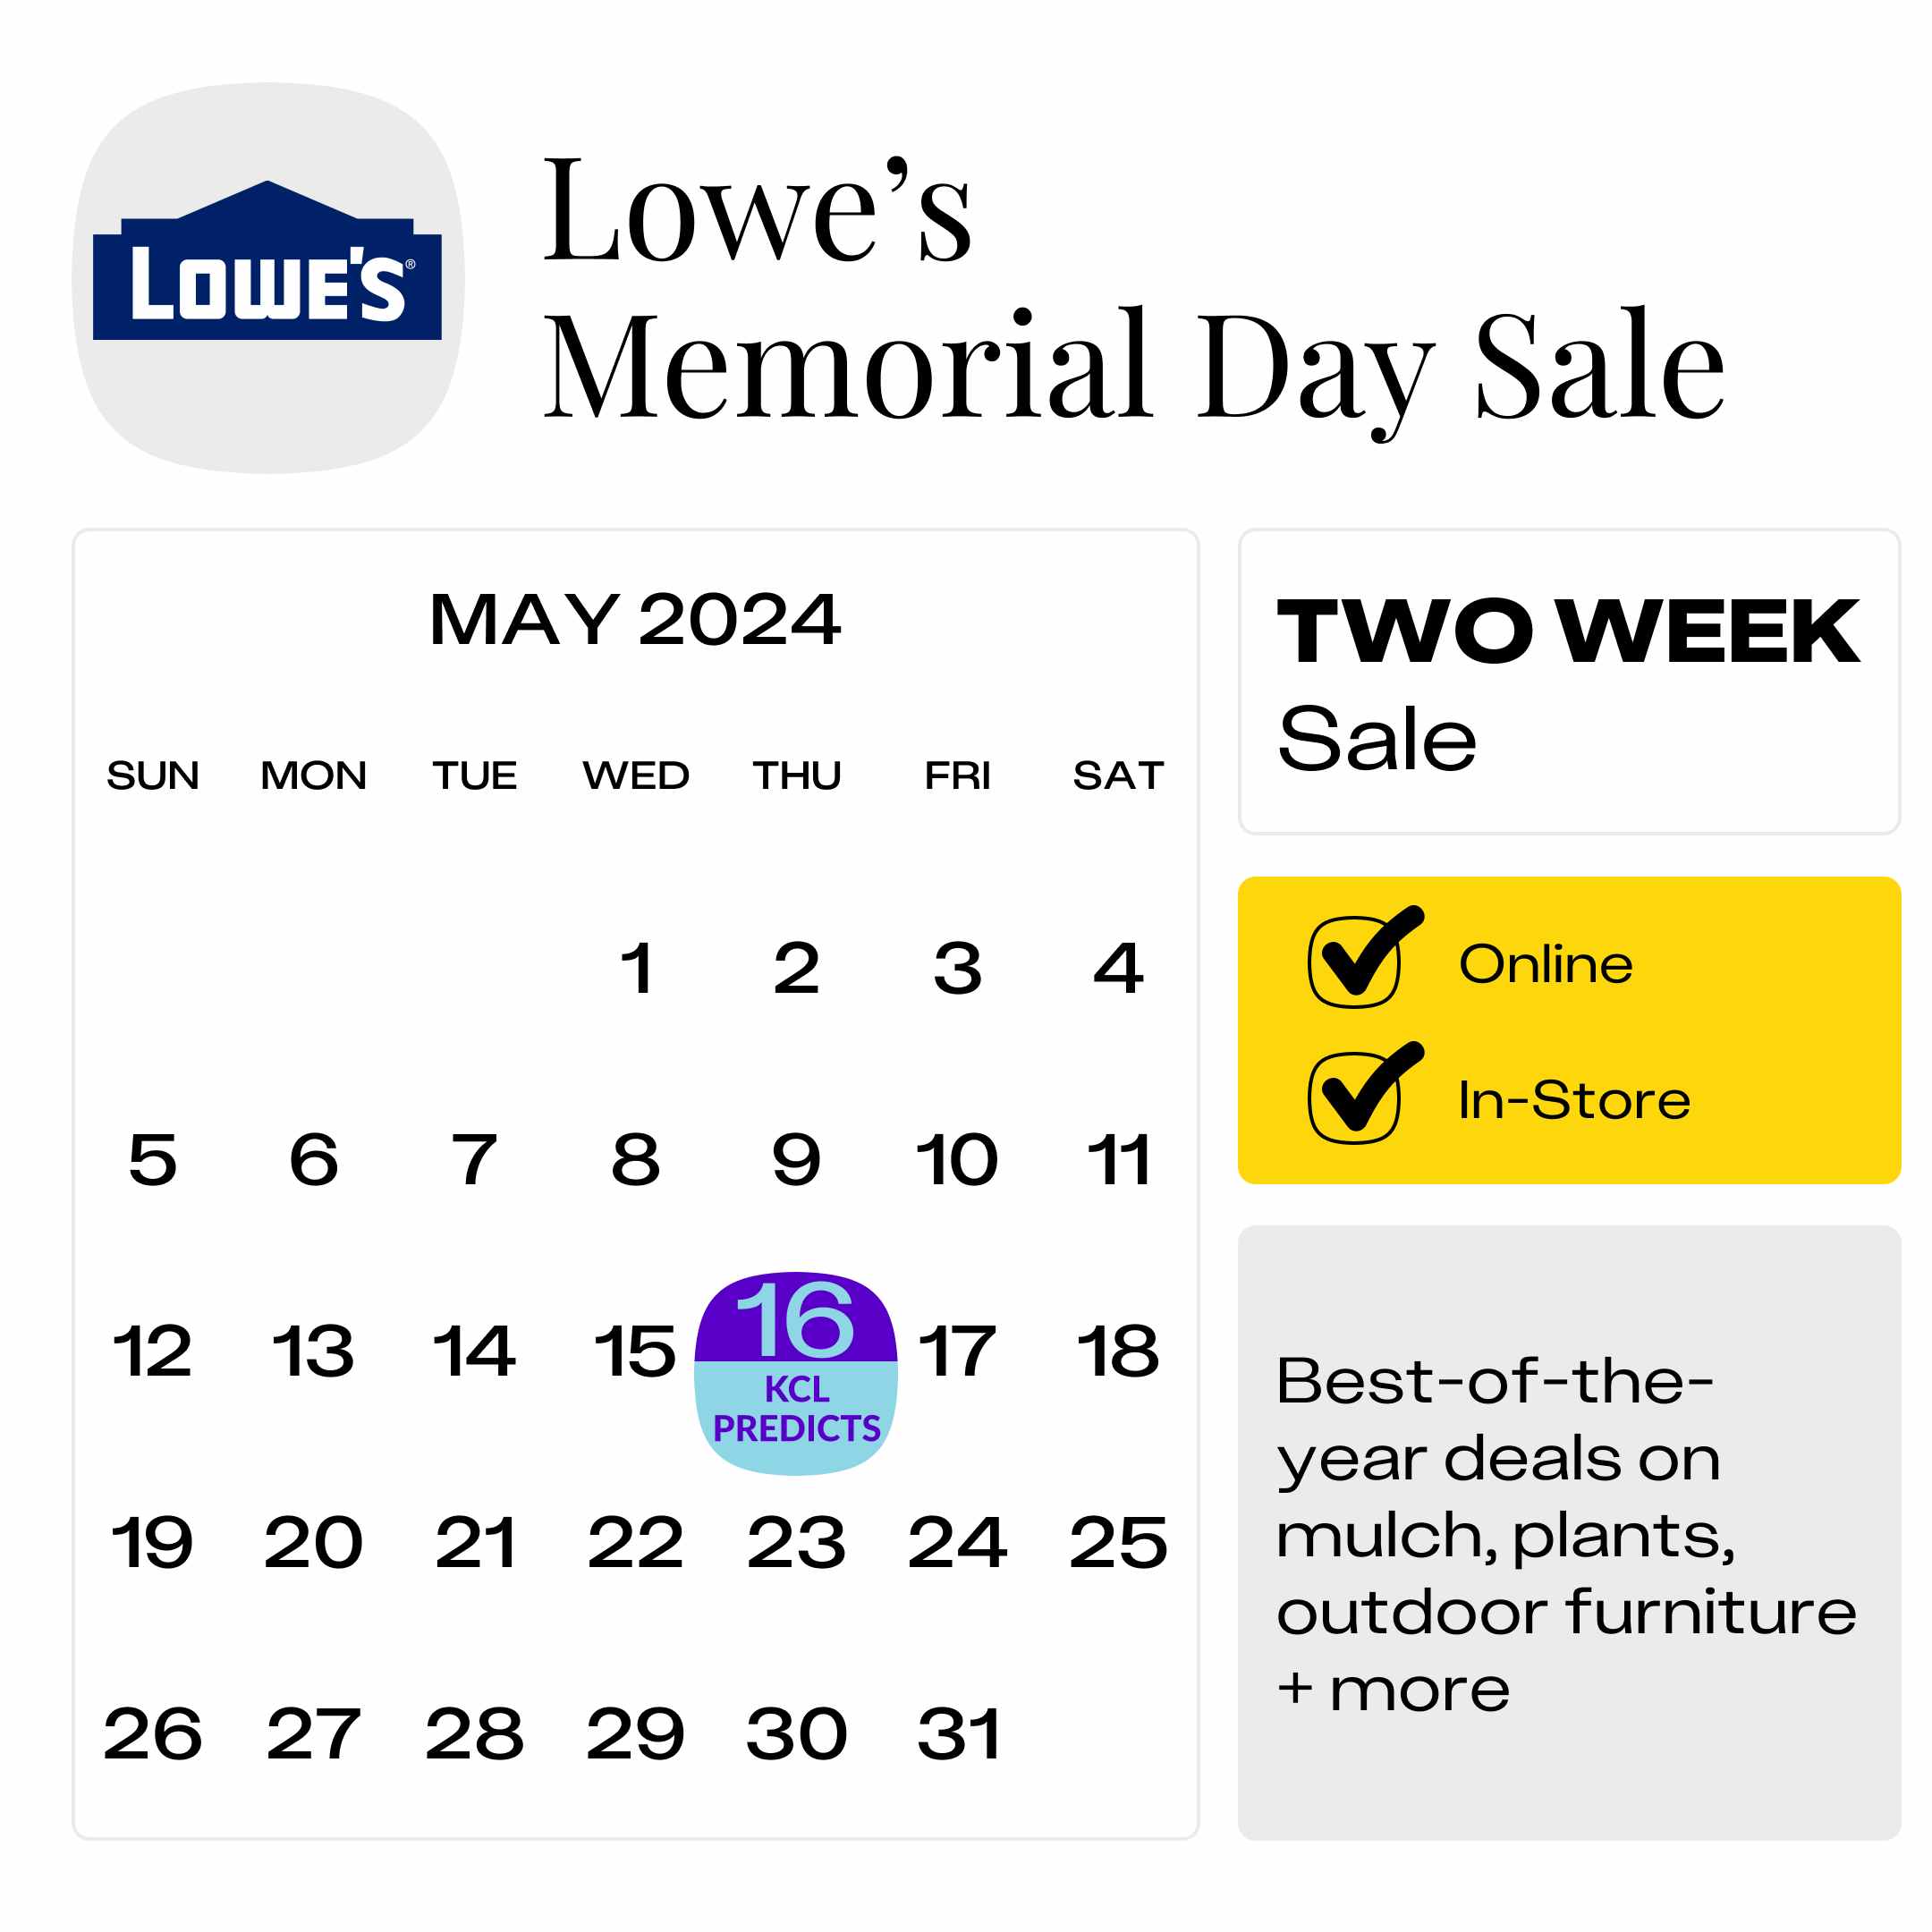 Lowes-Memorial-Day-Sale